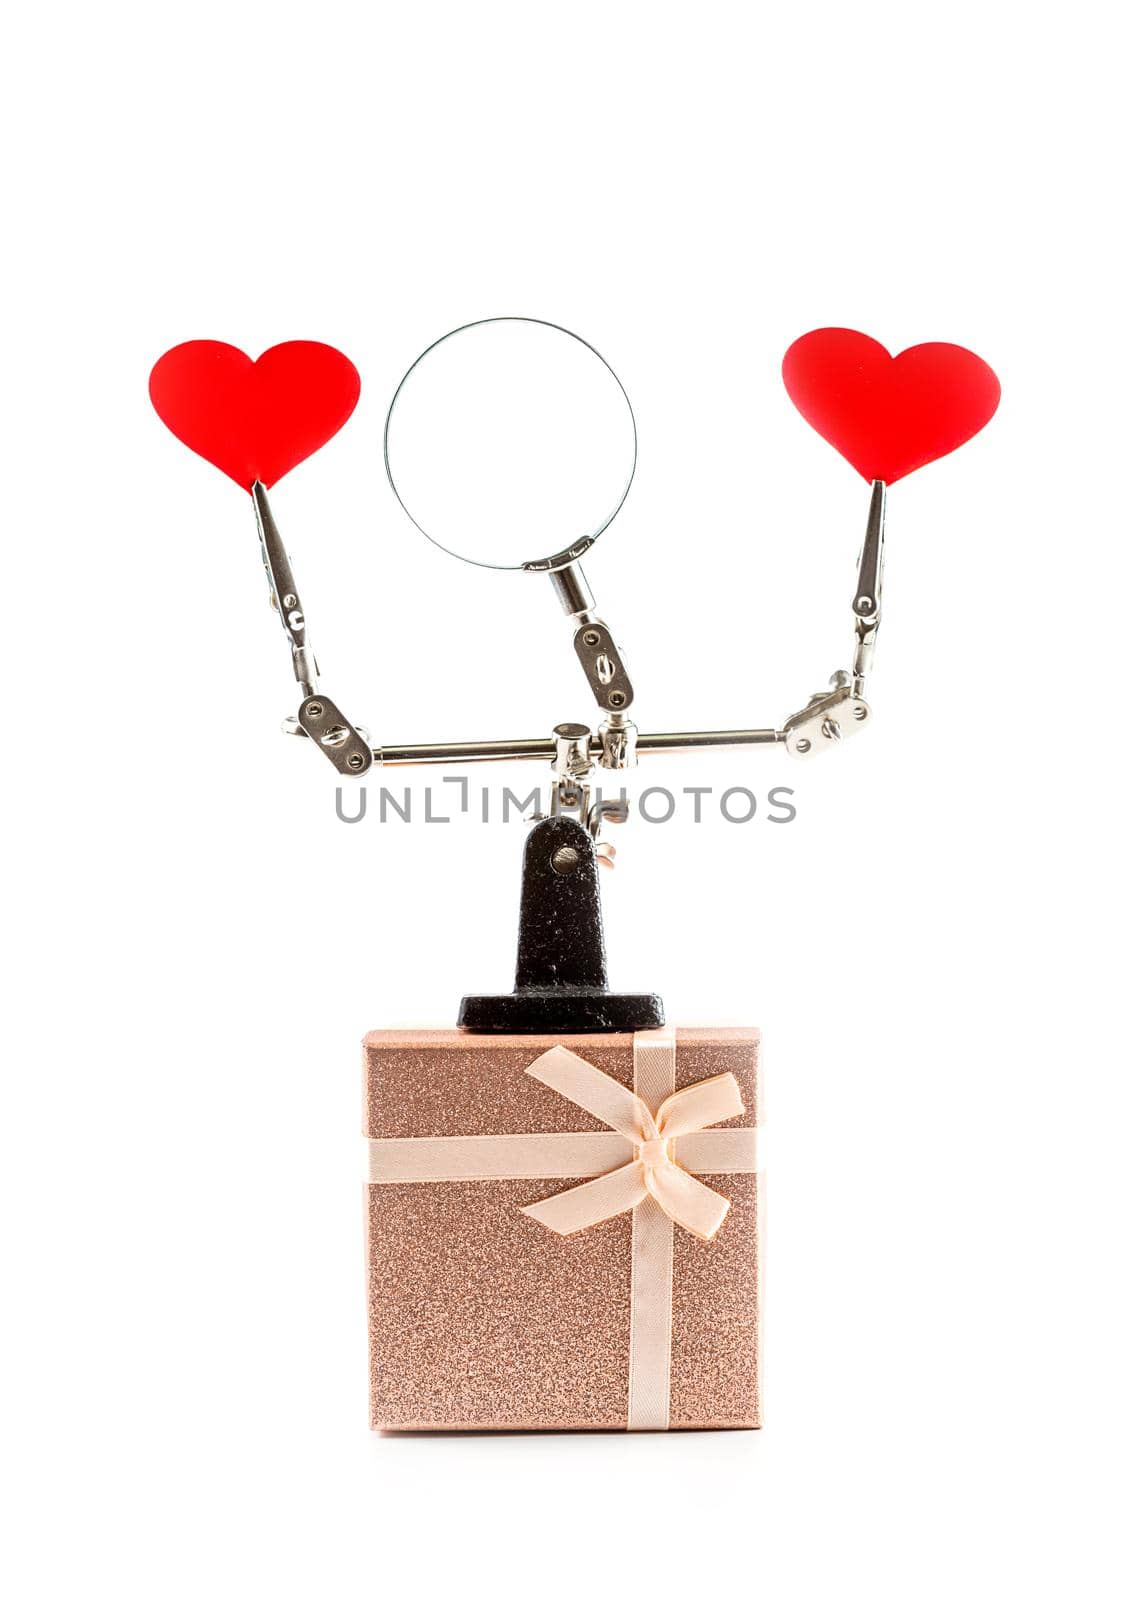 Valentines Day background with tool third hand holding hearts and gift by galinasharapova